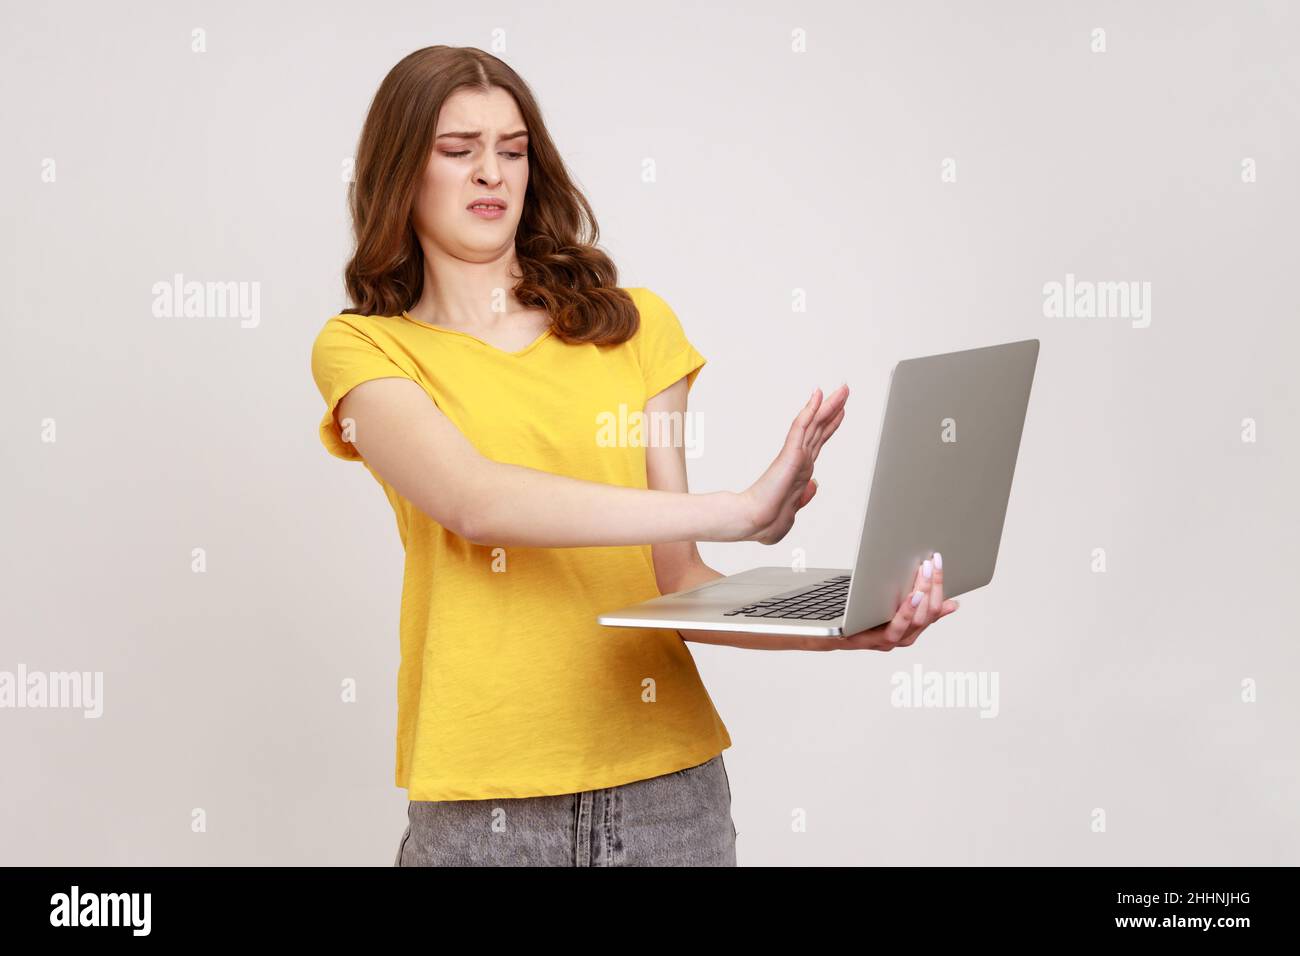 Forbidden content. Frightened teenager girl closing laptop and keeping hand in stop gesture to cover shameful post on internet, troubles with computer. Indoor studio shot isolated on gray background. Stock Photo